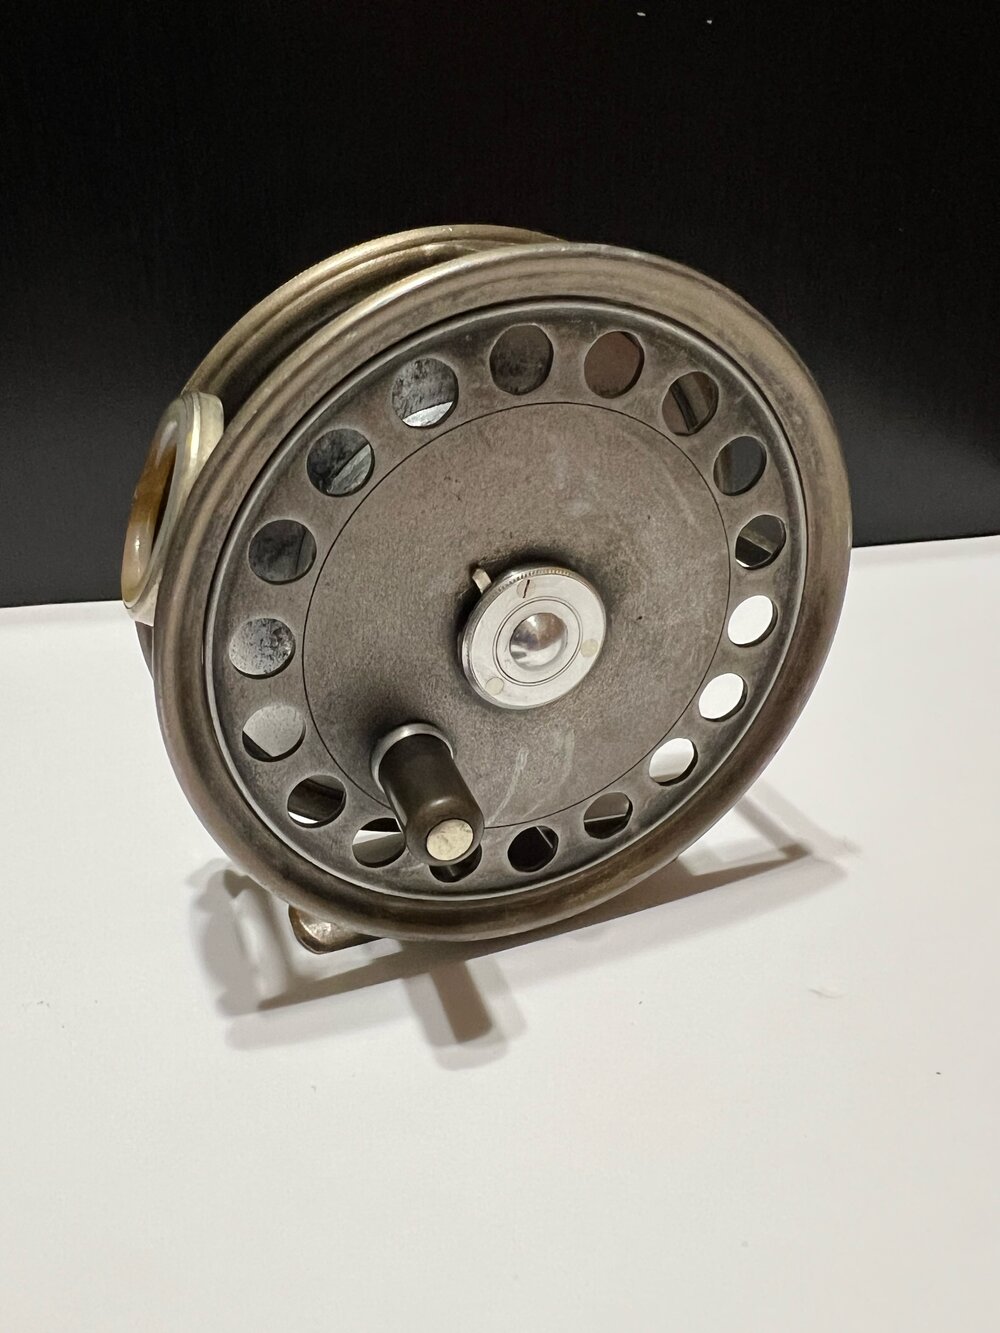 Hardy Gold Sovereign #3/4/5 Trout Fly Reel # 683 Limited Edition